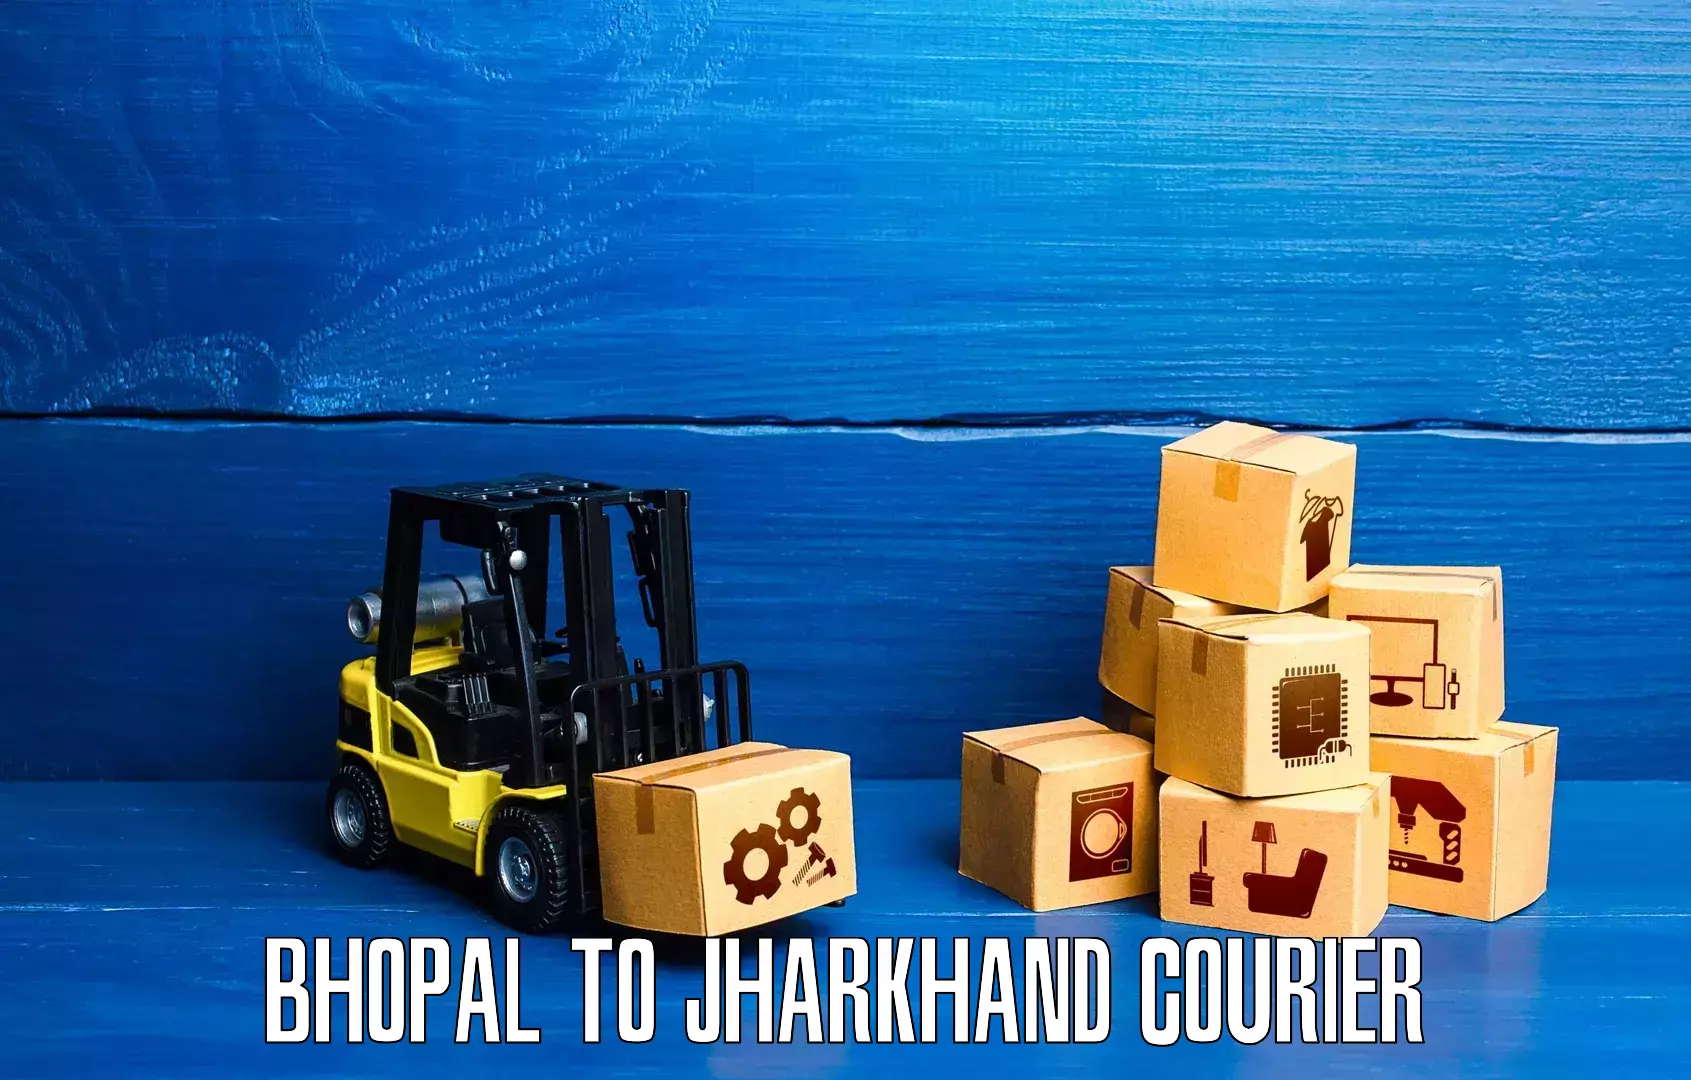 Comprehensive shipping network Bhopal to IIT Dhanbad